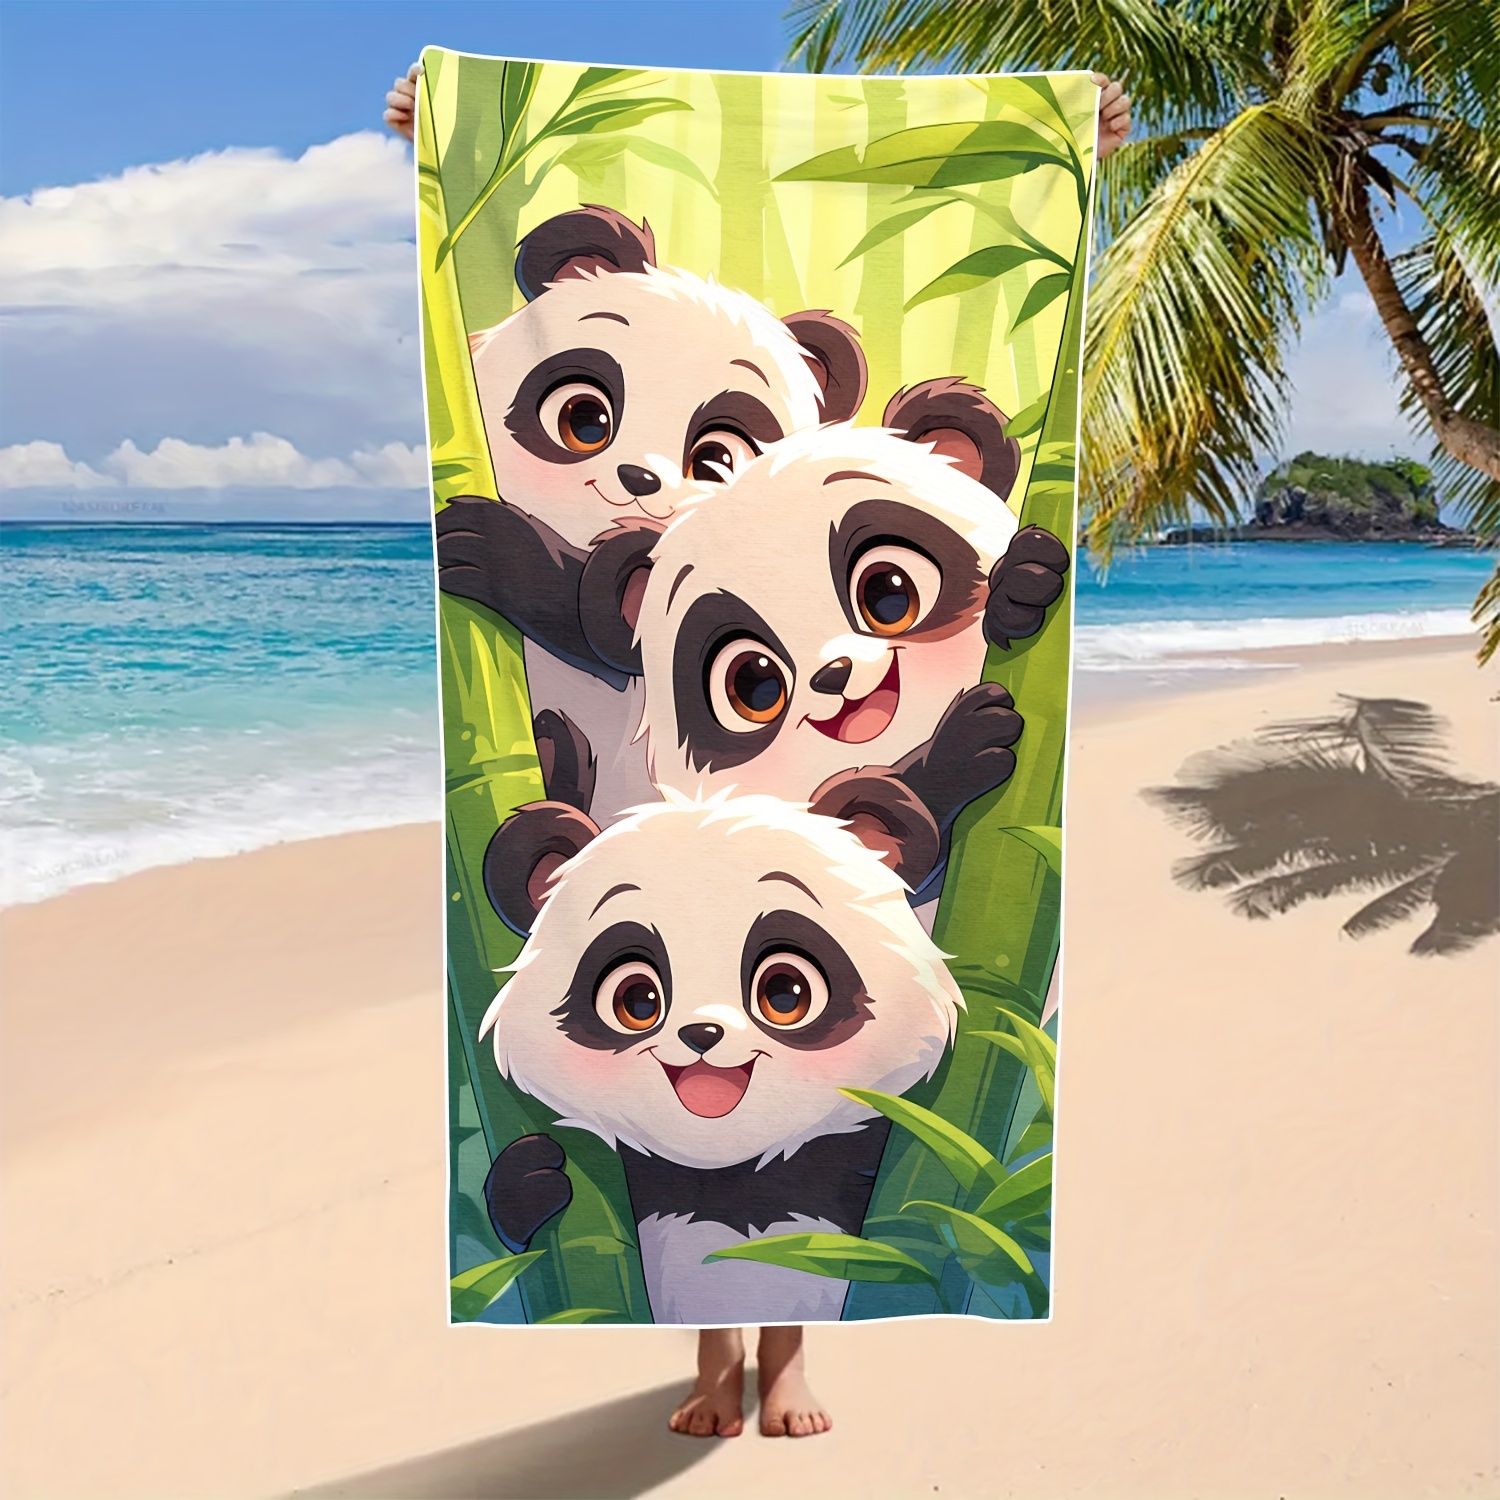 

Panda Bamboo Super Absorbent Beach Towel - Quick Dry, Lightweight & Stylish For Pool, Yoga, Travel & Camping